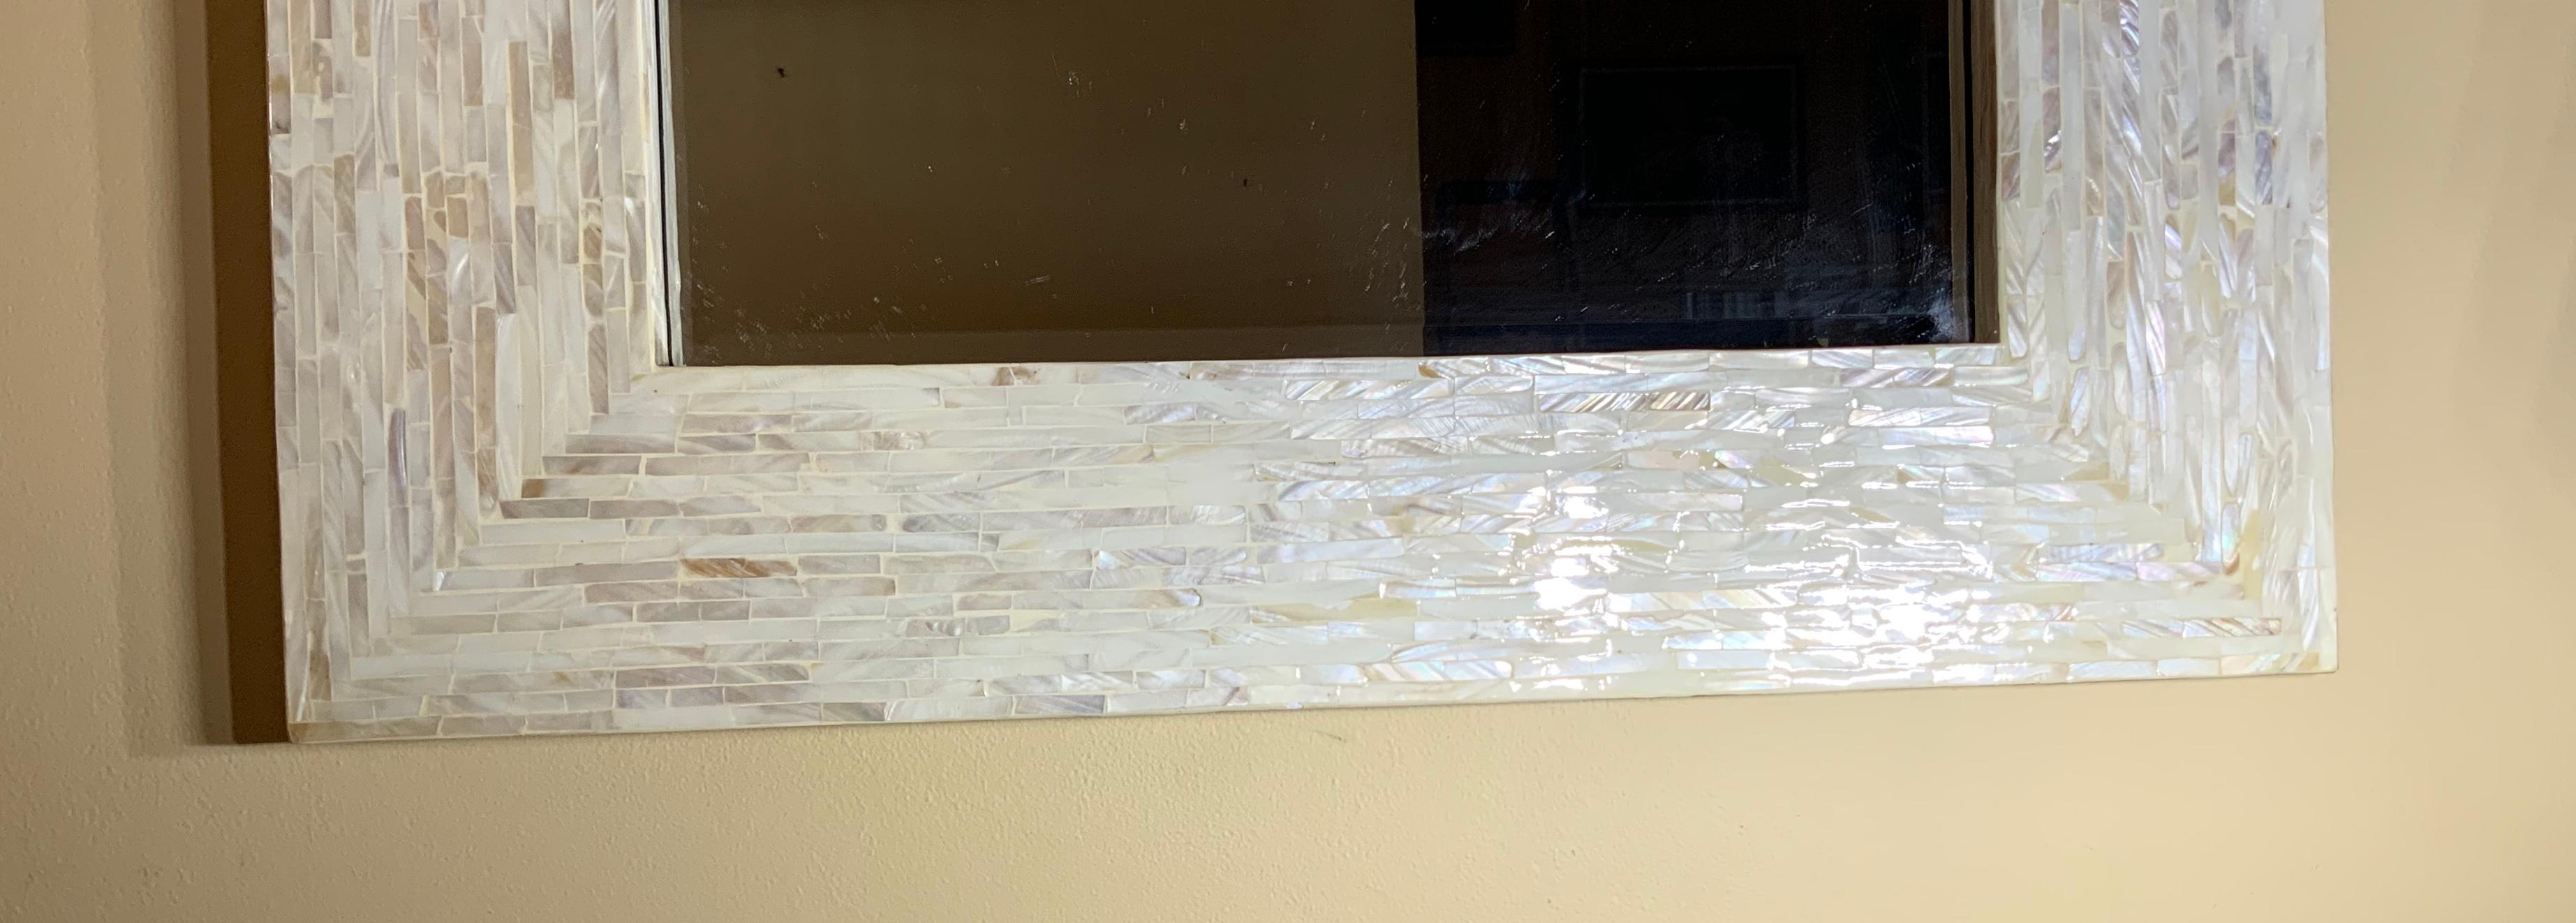 Beautiful mirror made of mother of pearl inlay, beveled mirror, could use horizontal or vertical.
Great elegant mirror for any room.
Actual mirror size is 19”.75 x 30”.